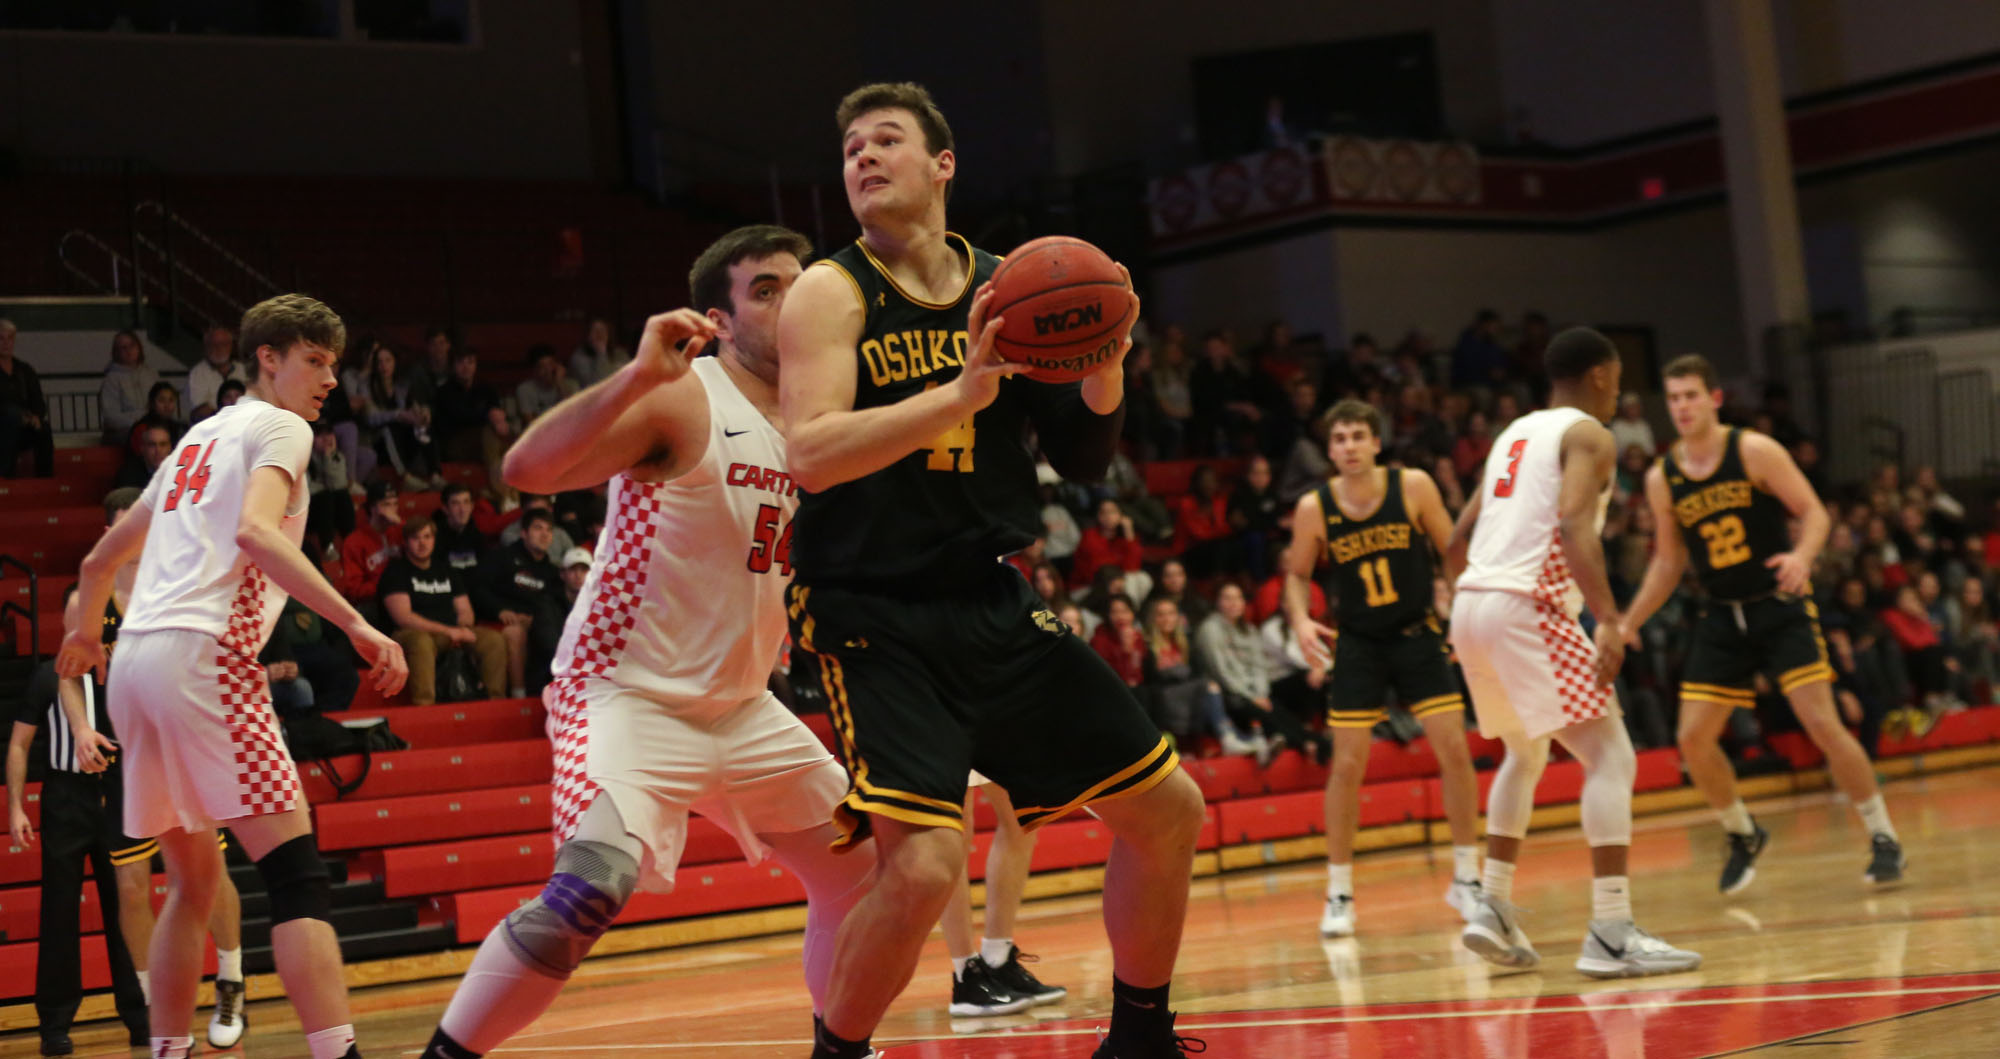 Jack Flynn had 17 points and 8 rebounds against the Red Men.